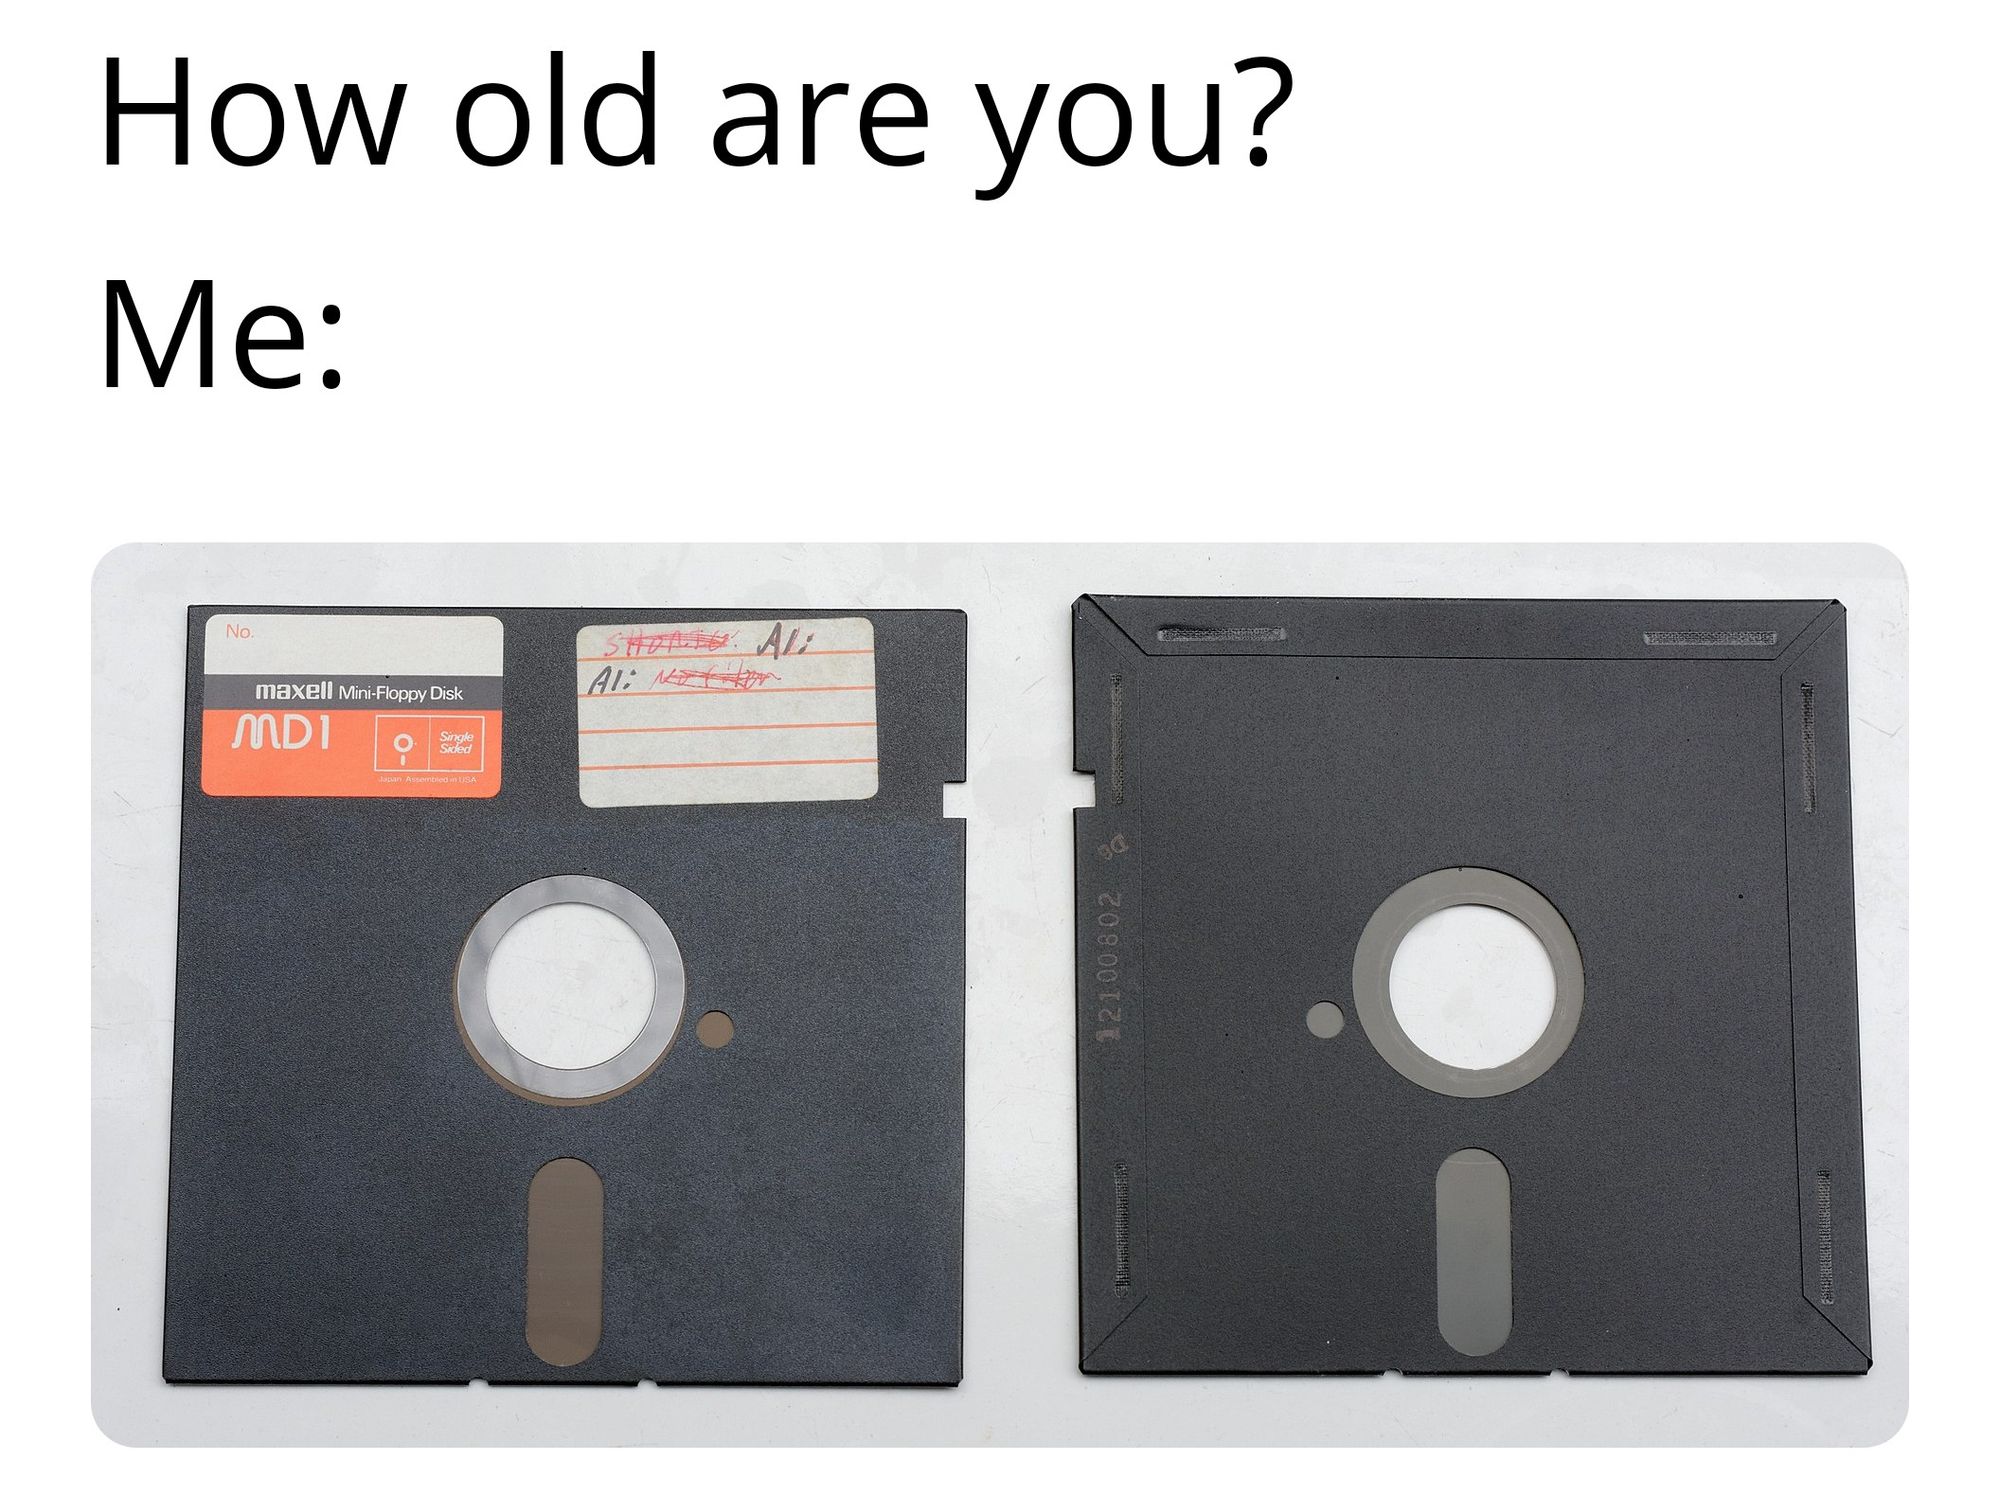 Image text says: How old are you? Me - then shows image of floppy disks